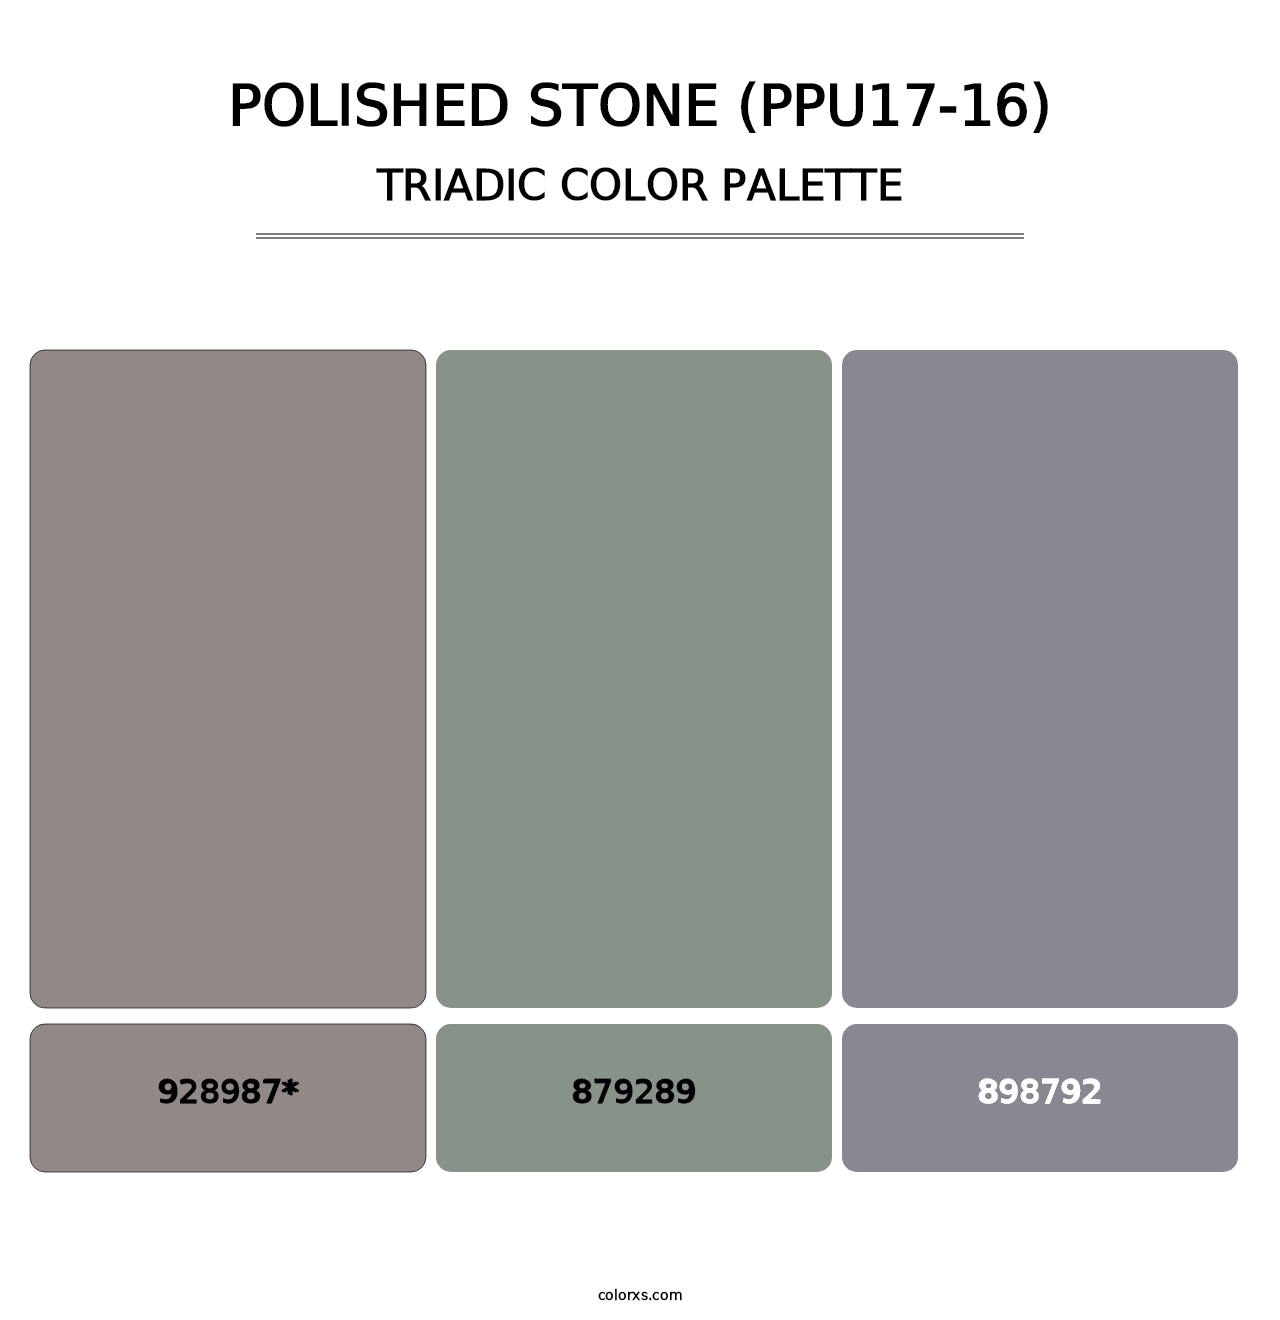 Polished Stone (PPU17-16) - Triadic Color Palette